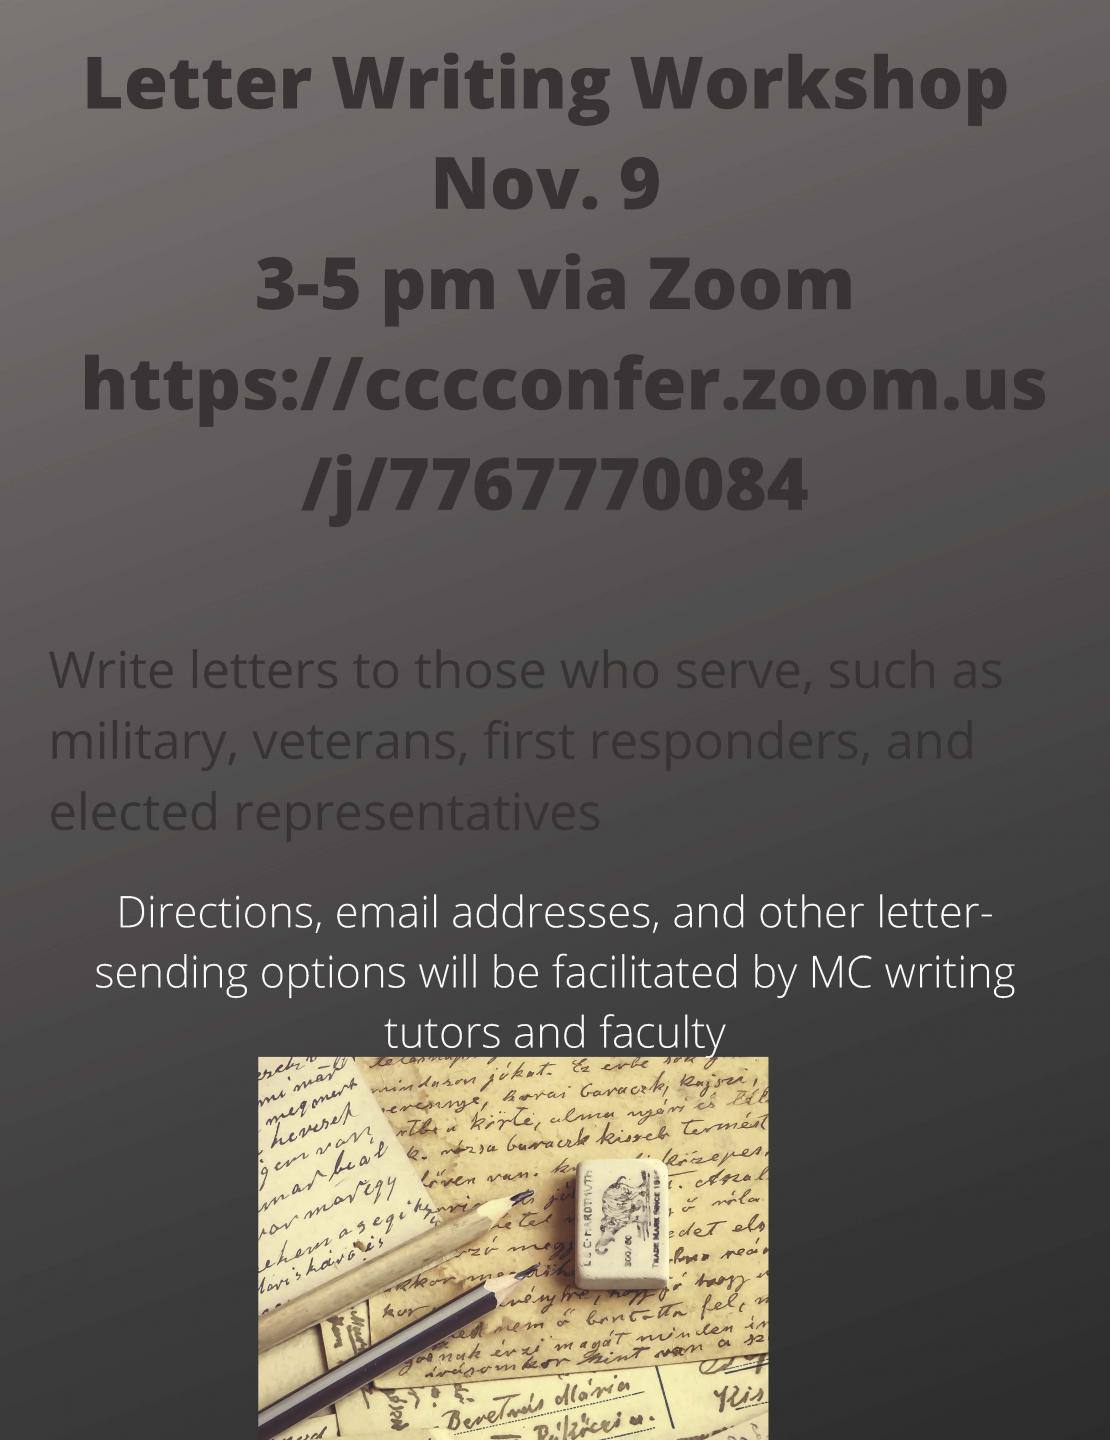 Flyer for Letter Writing Event November 9th on Zoom hosted by MC Writing Center